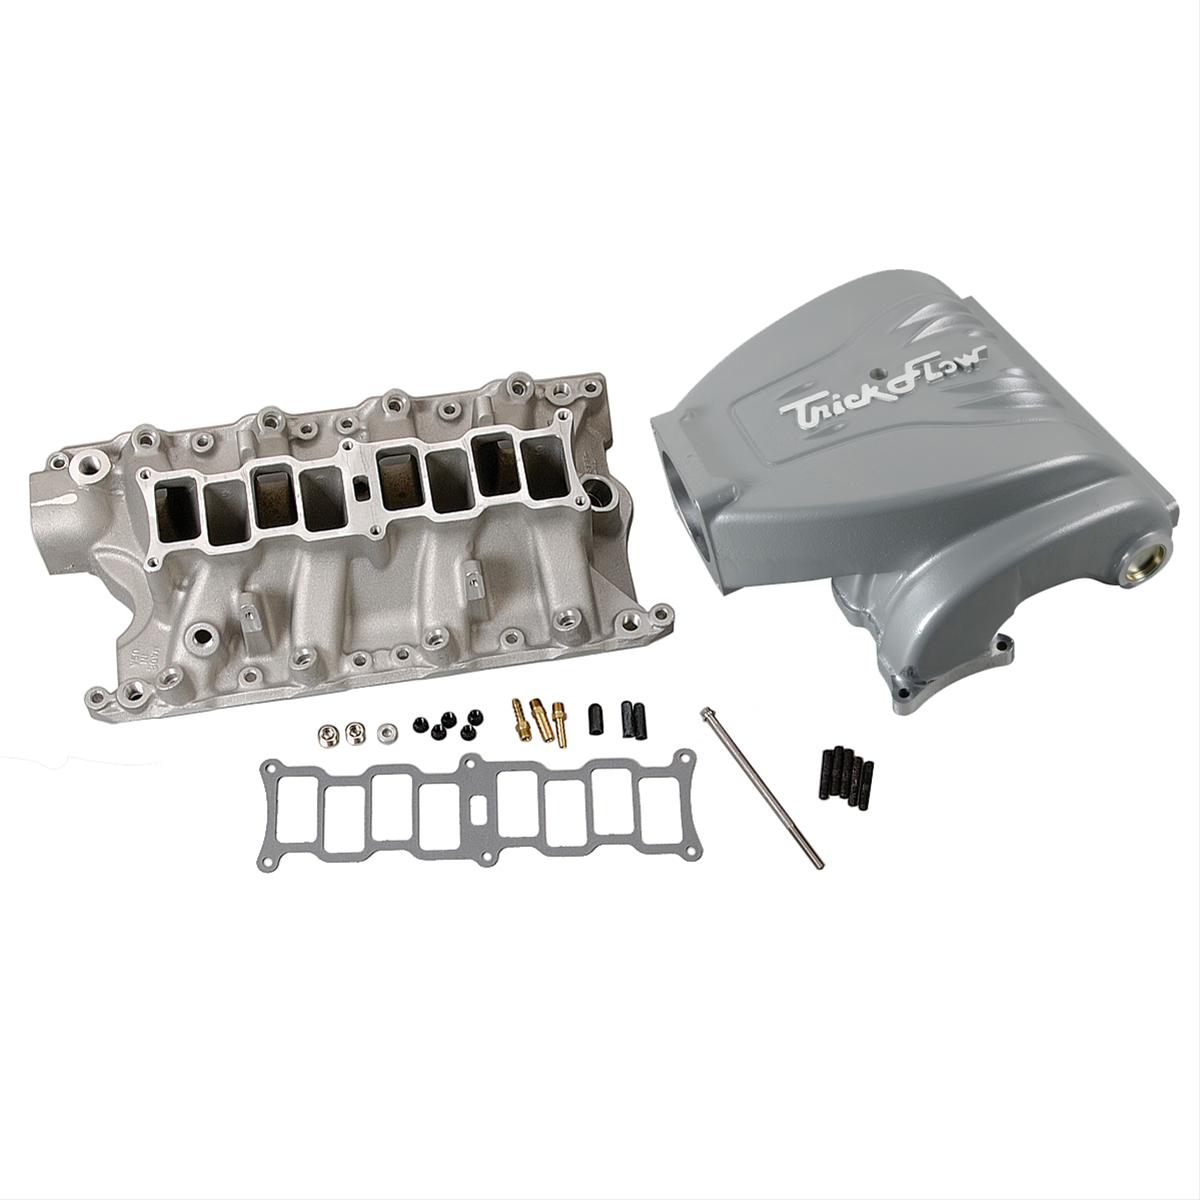 Free Shipping - Trick Flow® R-Series EFI Intake Manifolds for Ford 351 Wind...